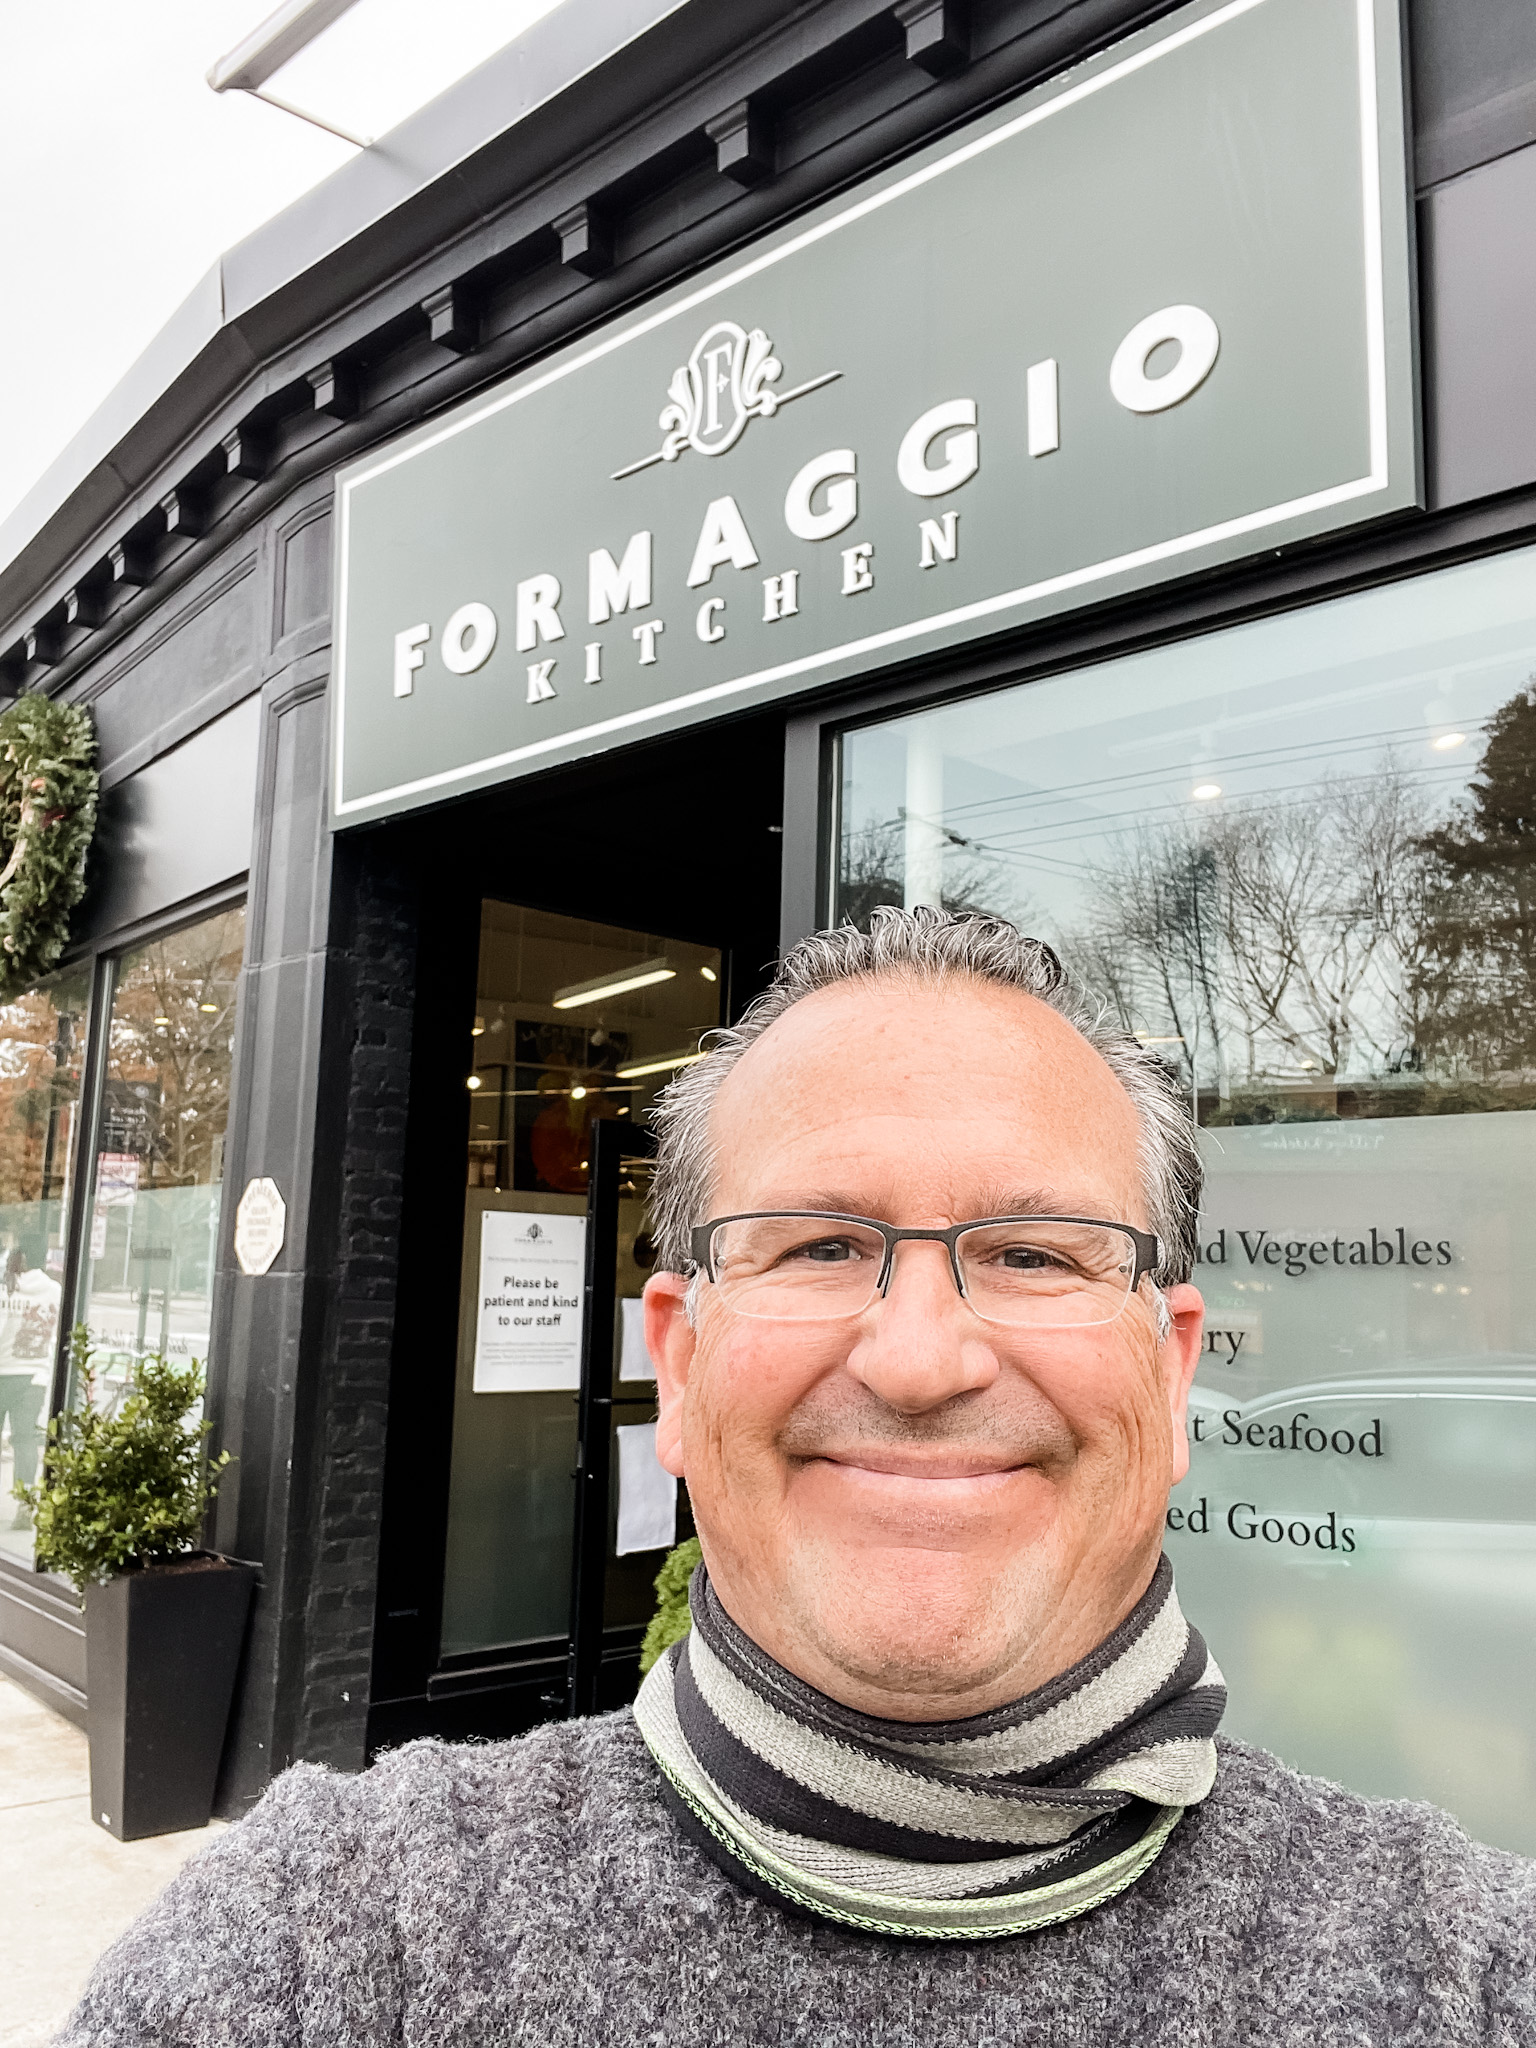 Meet me at Formaggio